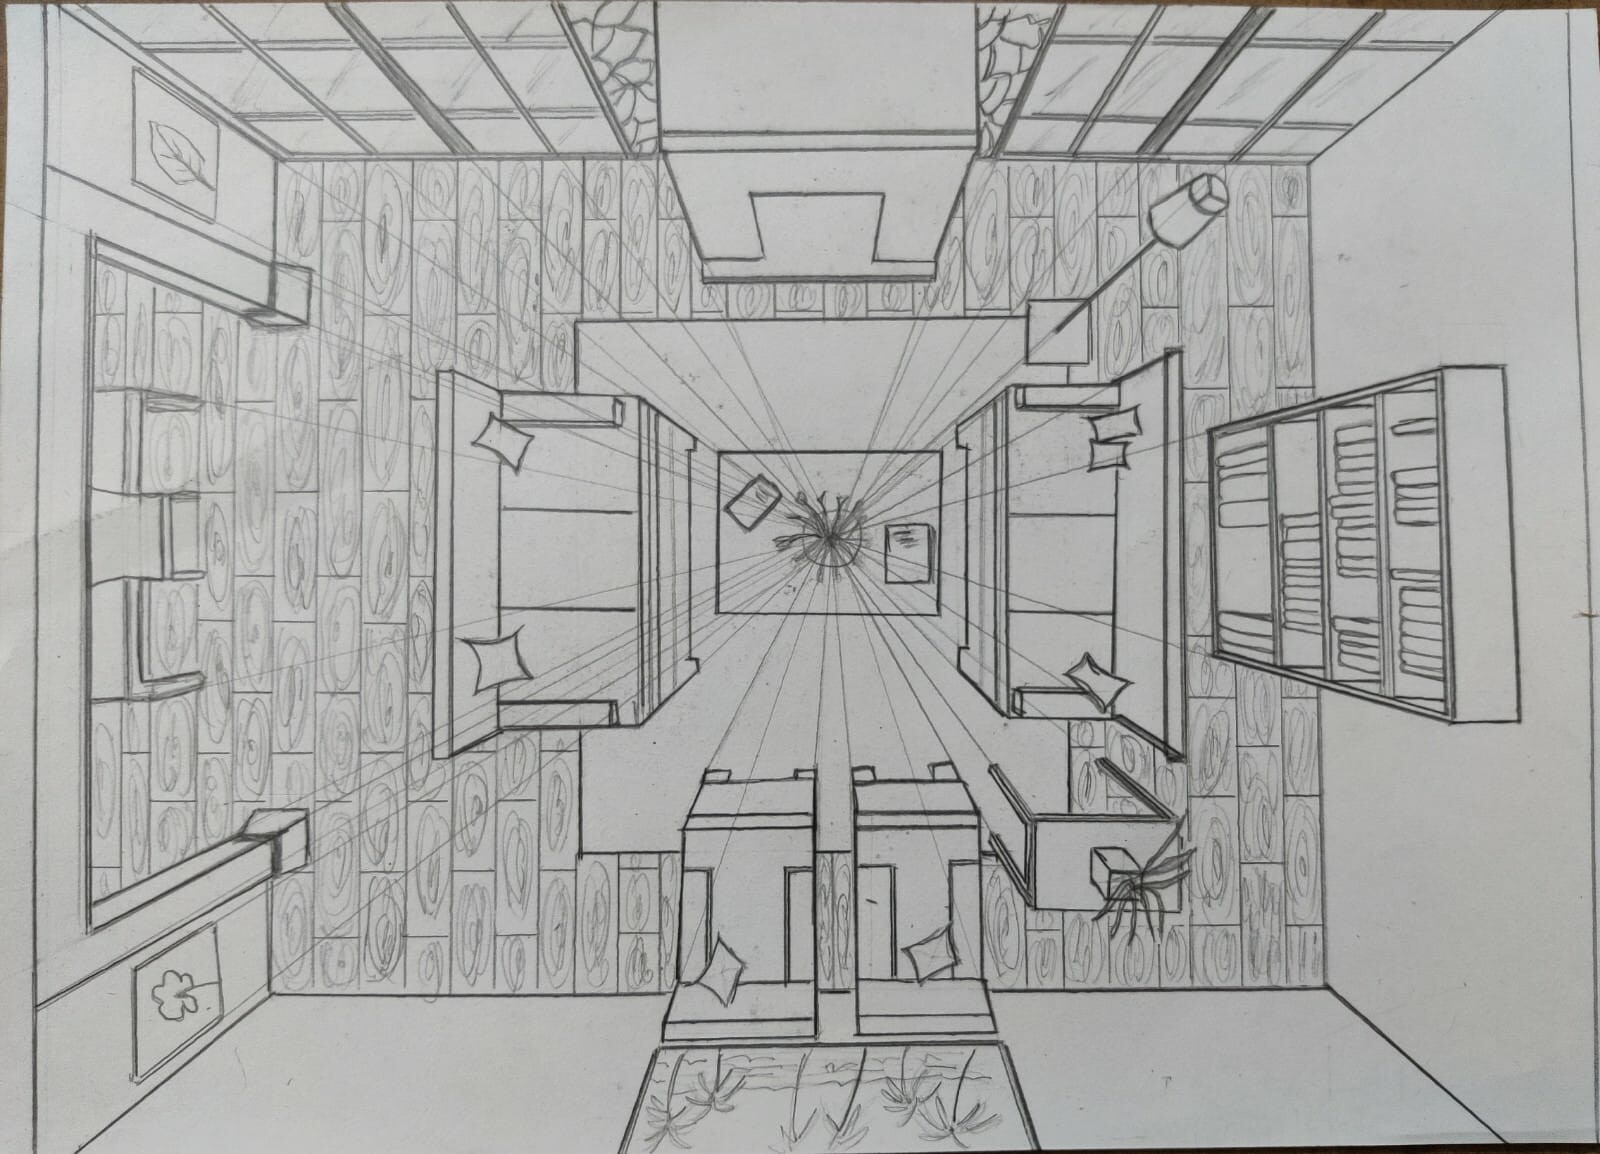 How to draw a 3-point perspective house - Quora